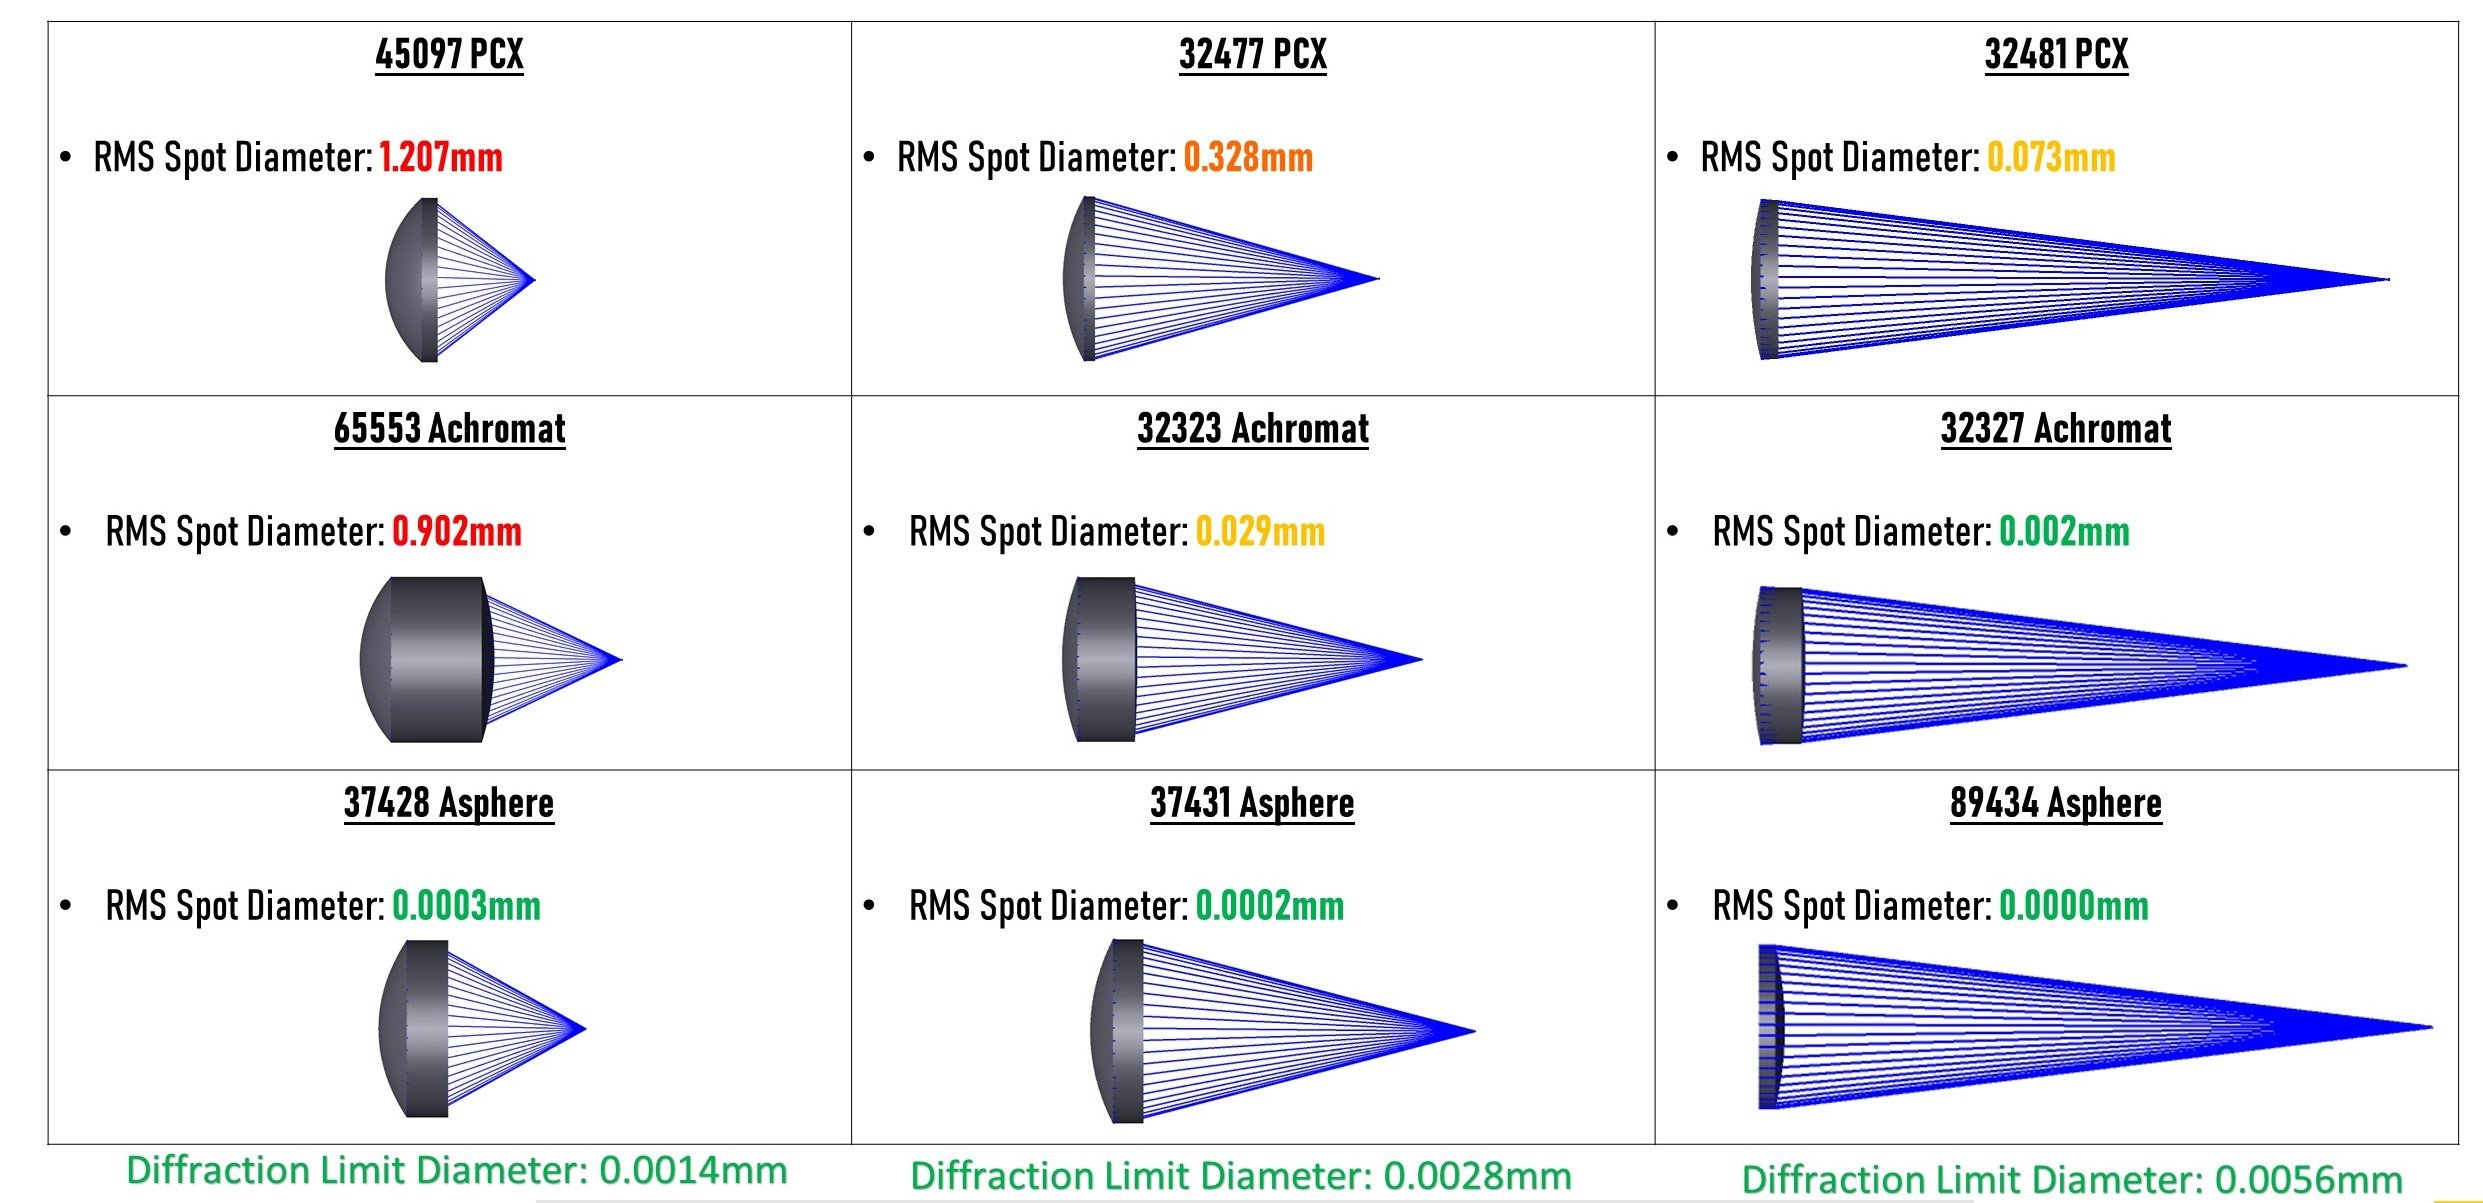 Figure 2: Performance of various PCX, achromatic, and aspheric lenses for a single wavelength source (diffraction-limited performance from aspheres 89434, 37431, and 37428 as well as achromat 32327).